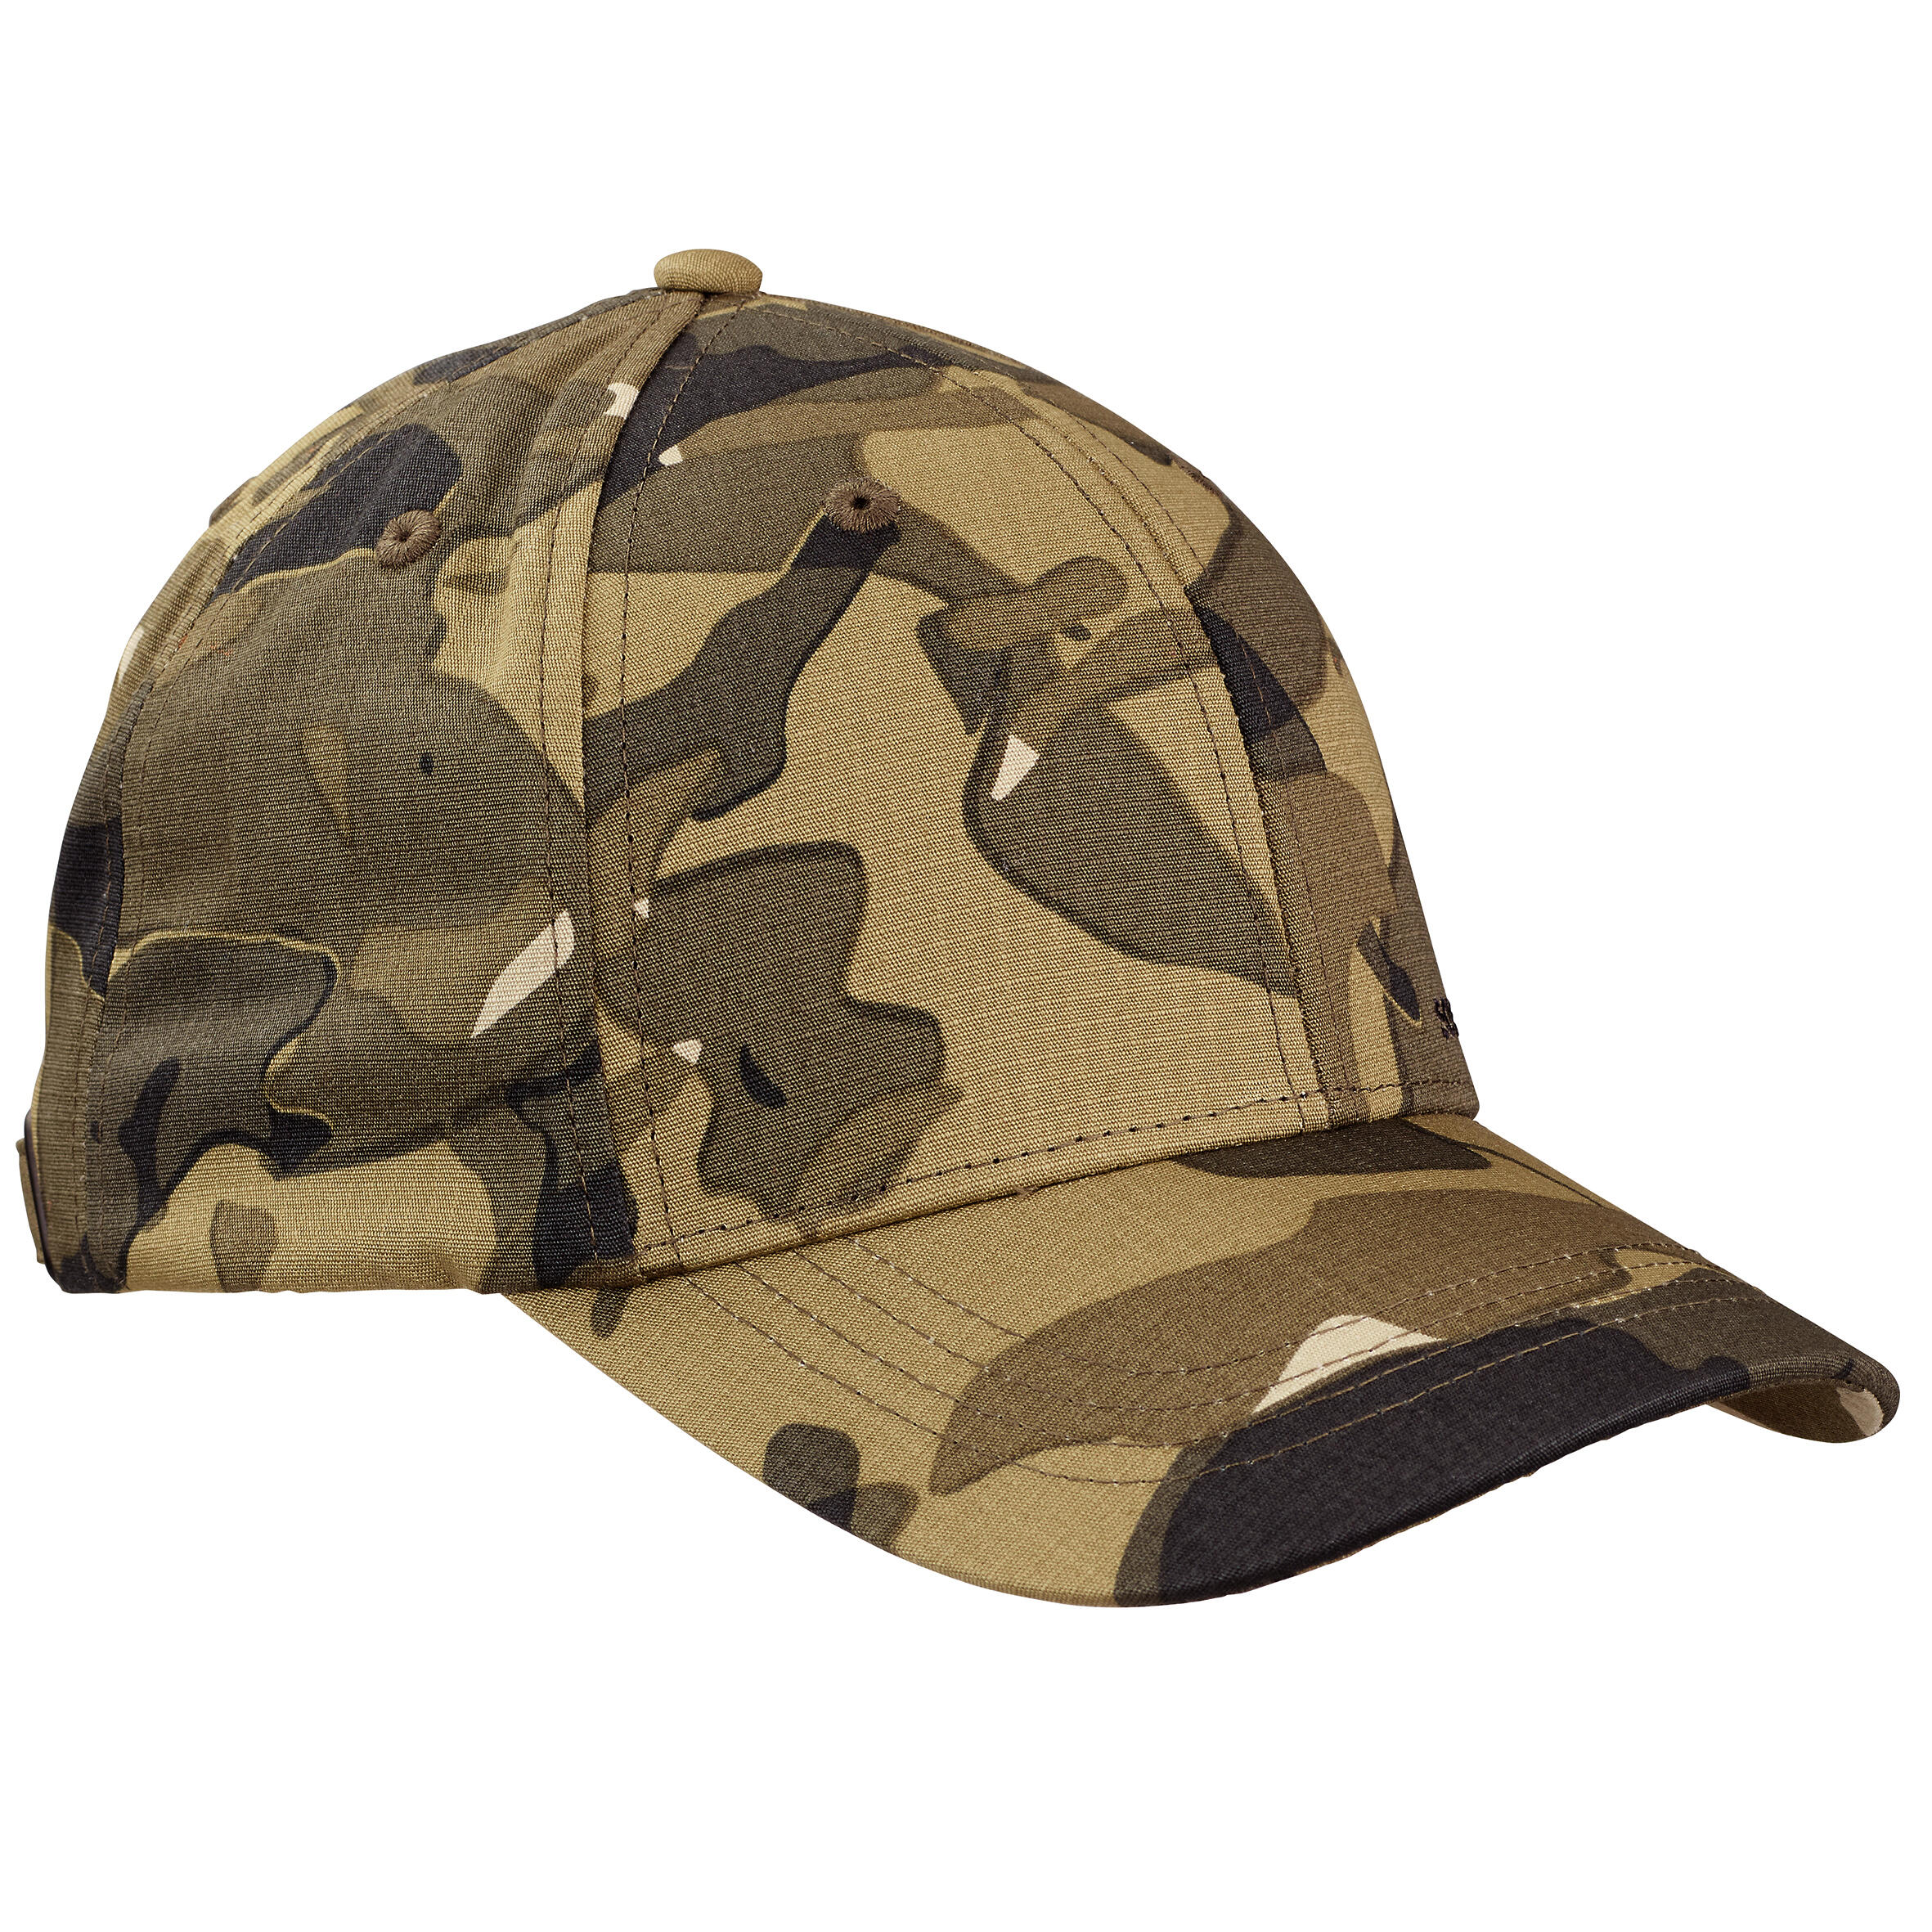 SOLOGNAC Country Sport Durable Cap 500 Woodland Camouflage Green